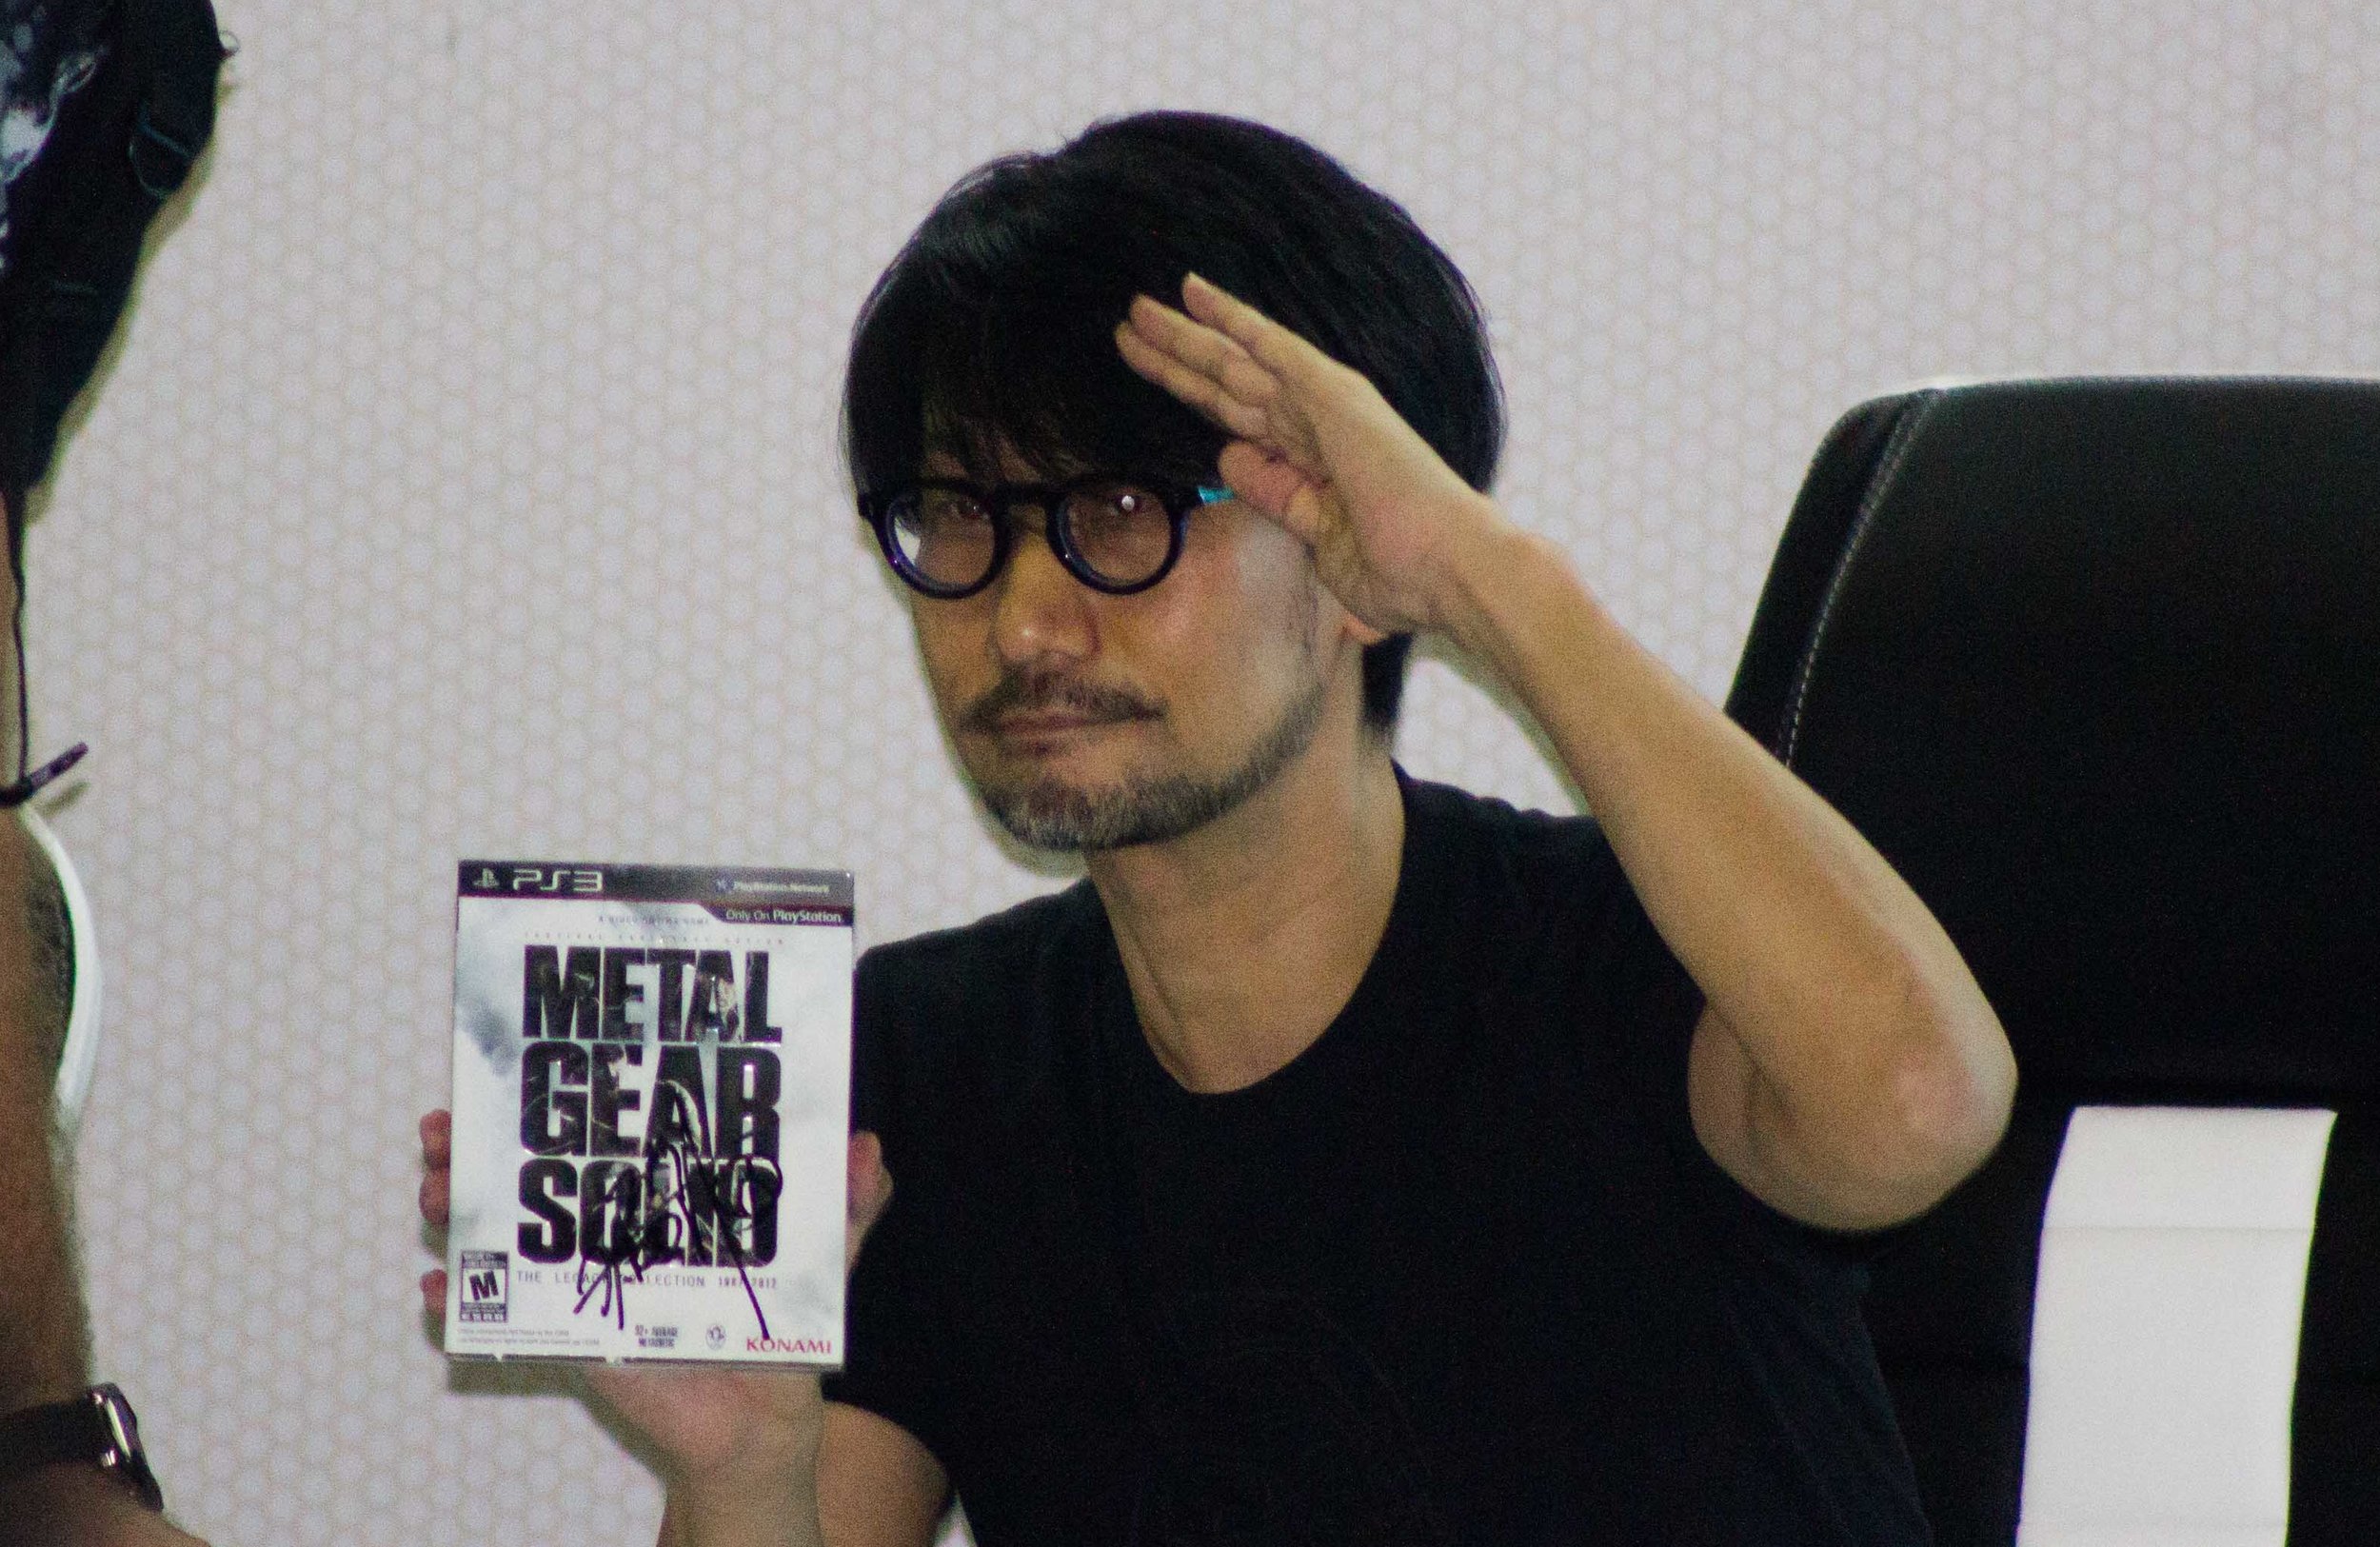 Now Online: Hideo Kojima- Making the Impossible Possible Hideo